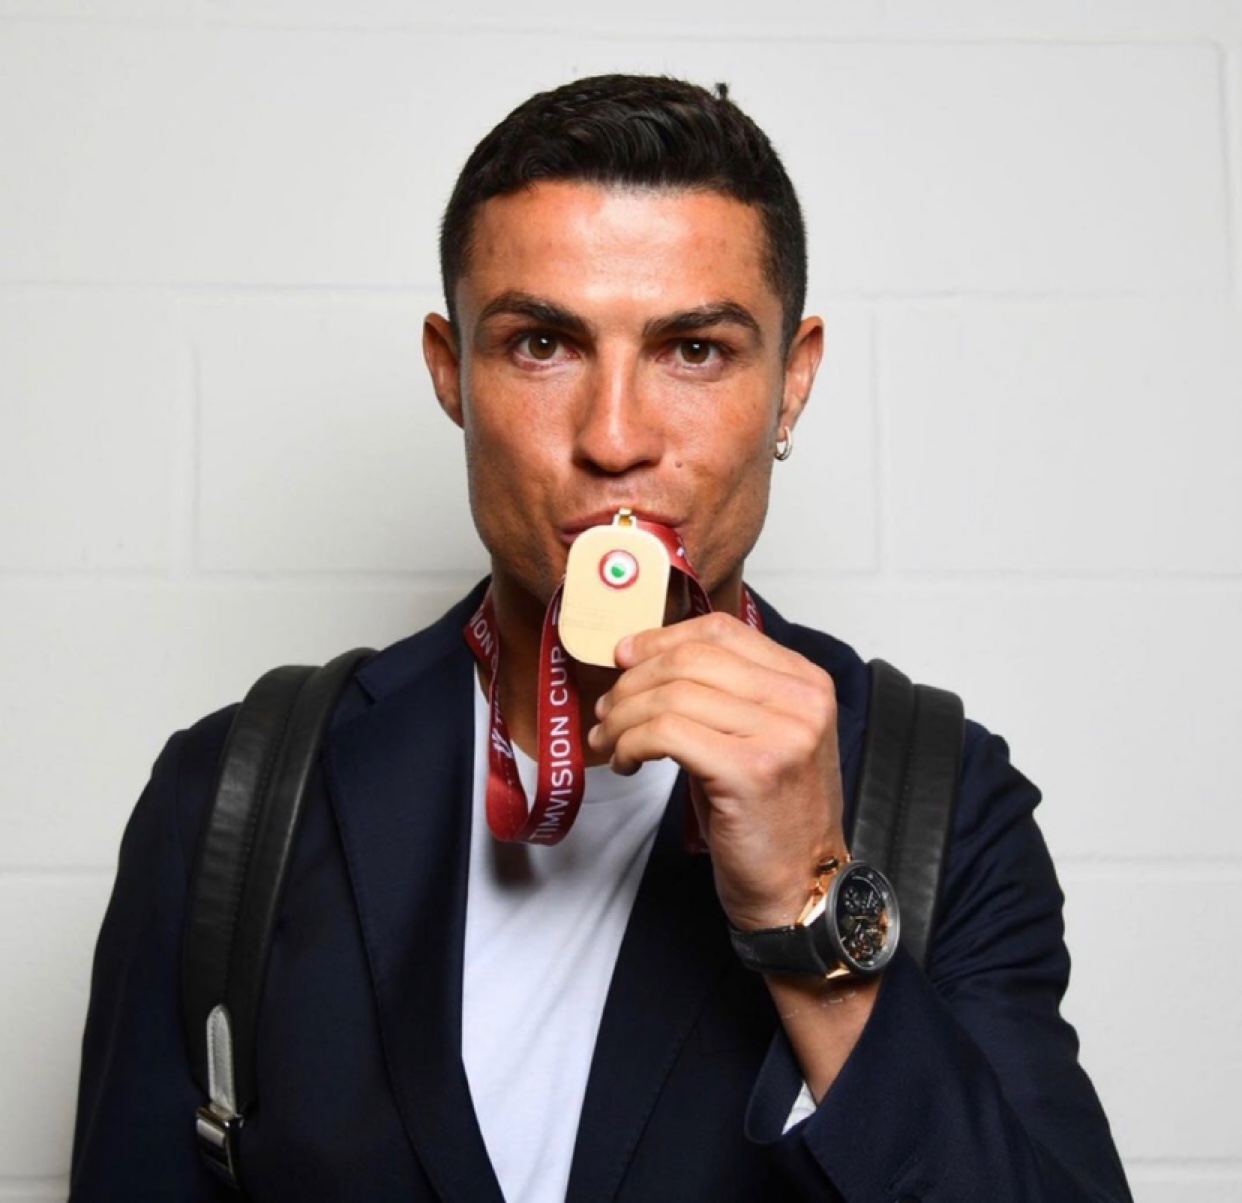 Cristiano Ronaldo is the first person in the world to have 300 million Instagram followers 